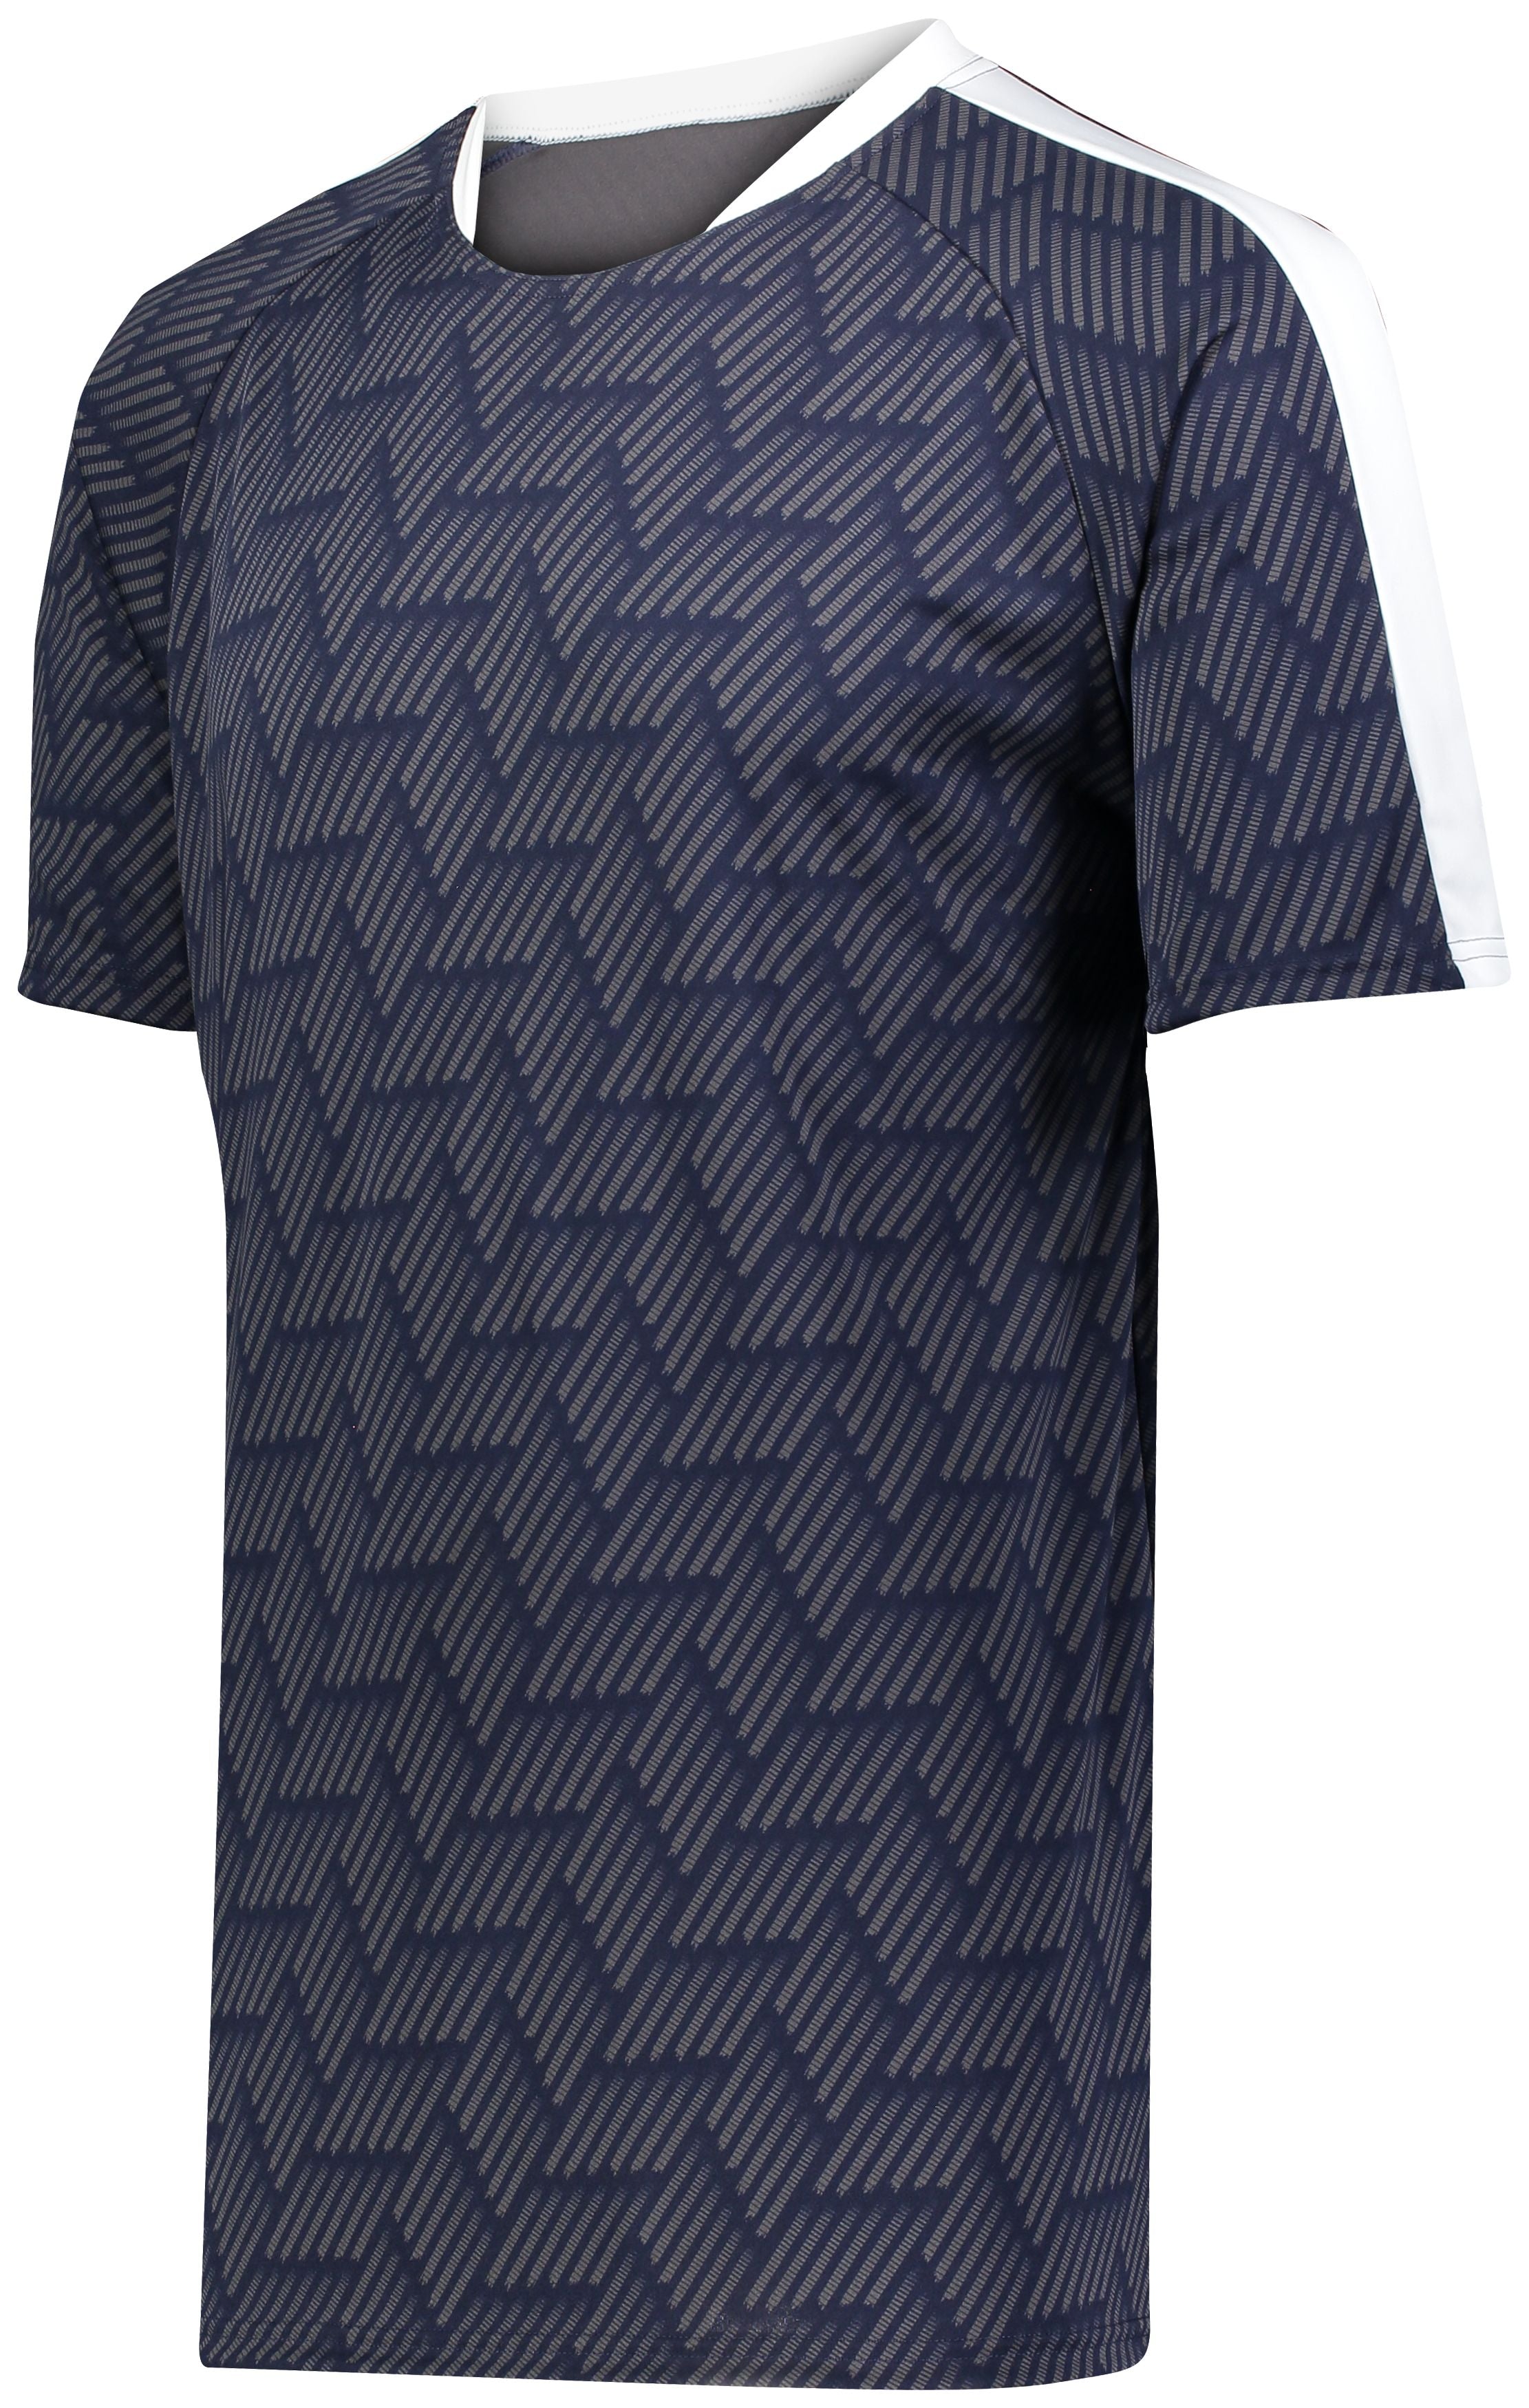 High 5 Youth Hypervolt Jersey in Navy Print/White  -Part of the Youth, Youth-Jersey, High5-Products, Soccer, Shirts, All-Sports-1 product lines at KanaleyCreations.com